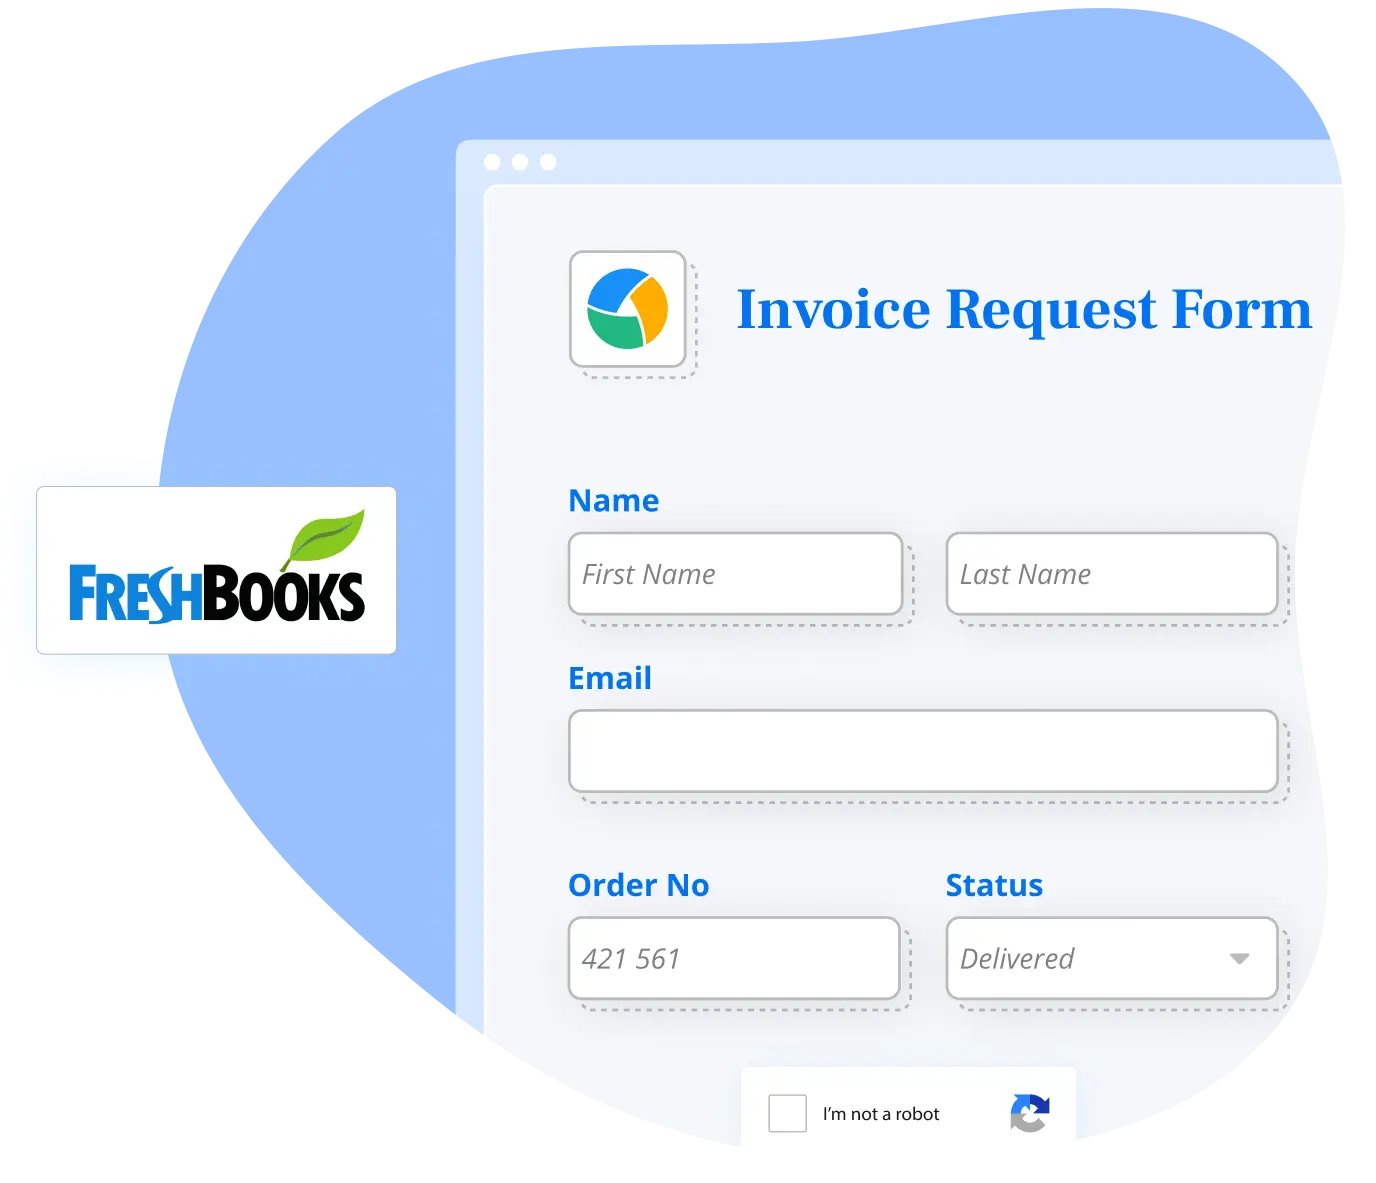 Image showing a Invoice Request Template integration with FreshBooks